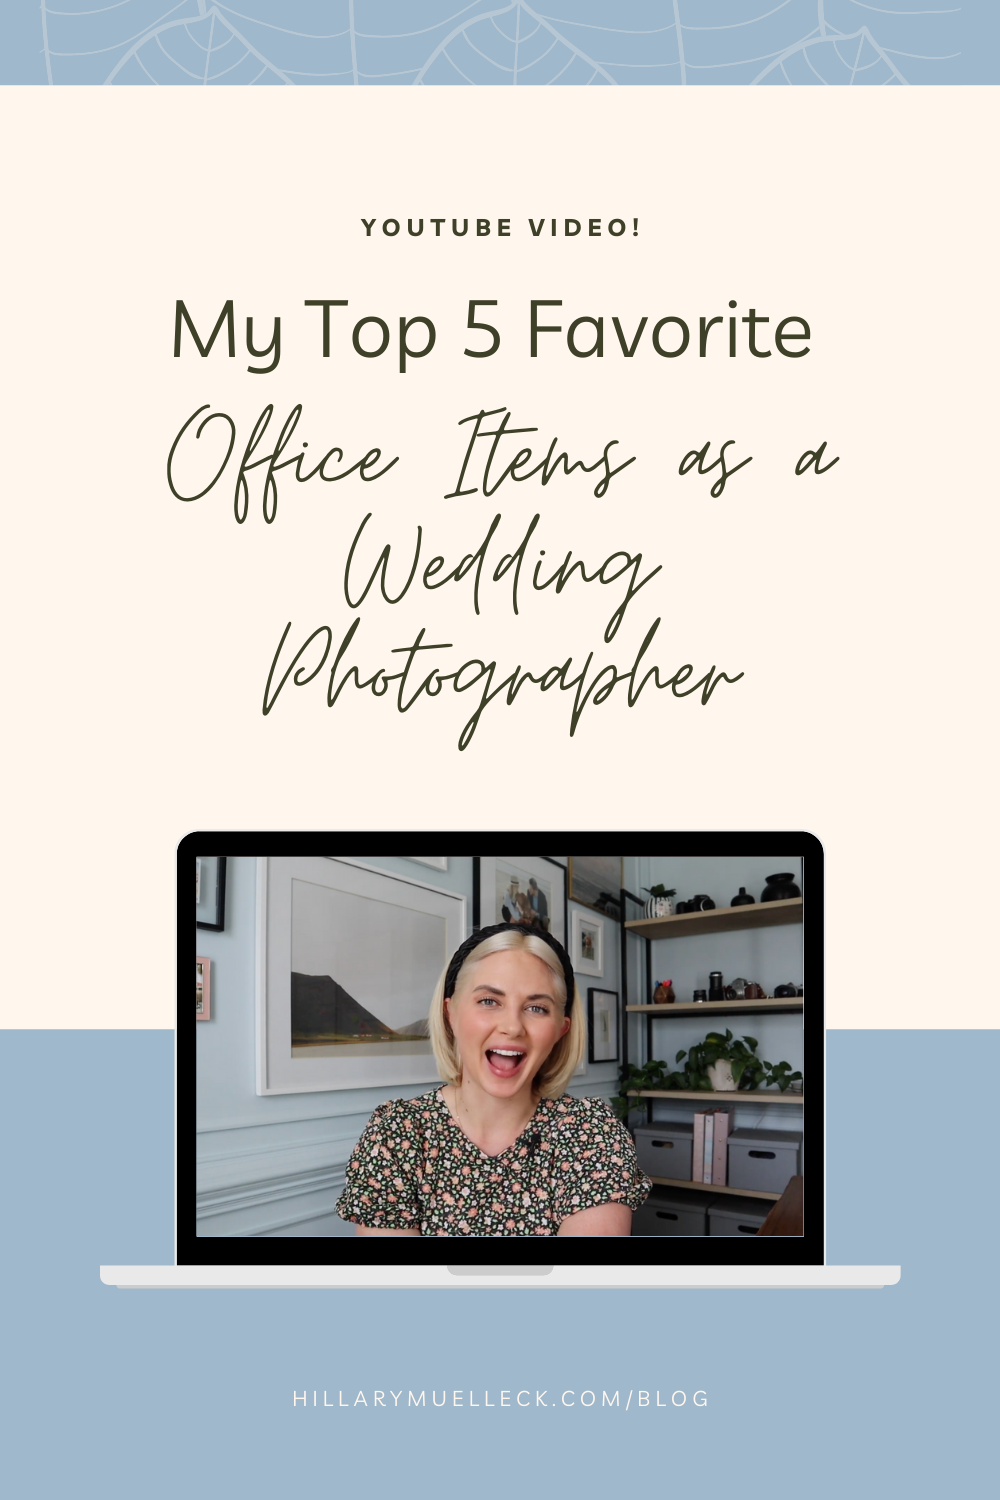 My five favorite office items as a wedding photographer to stay organized and on top of my business, shared by Hillary Muelleck